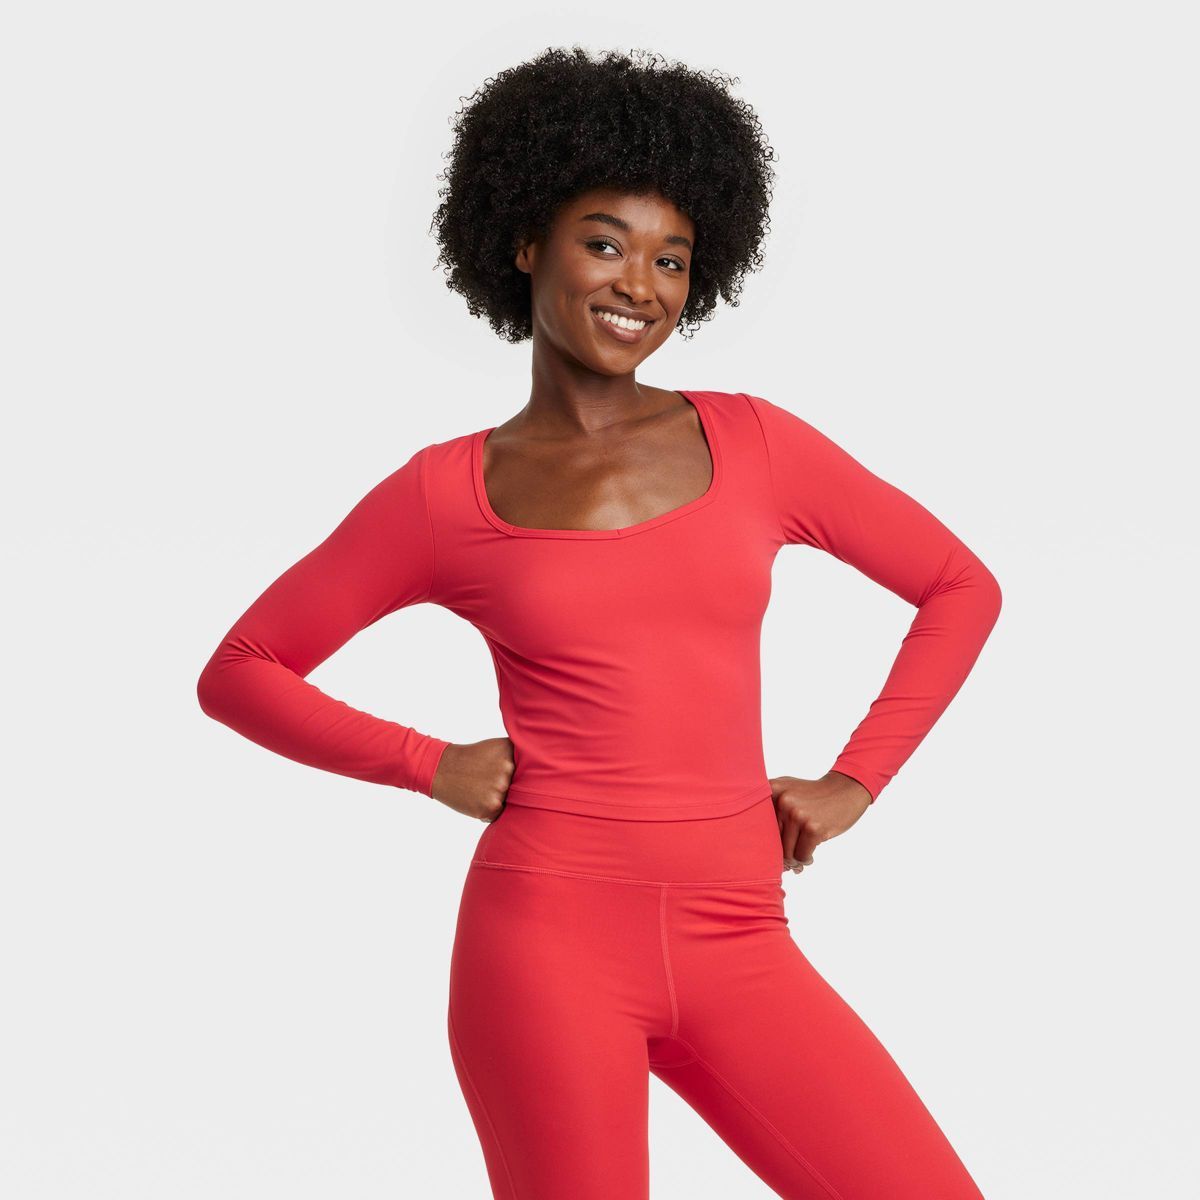 Women's Everyday Soft Long Sleeve Top - All In Motion™ | Target